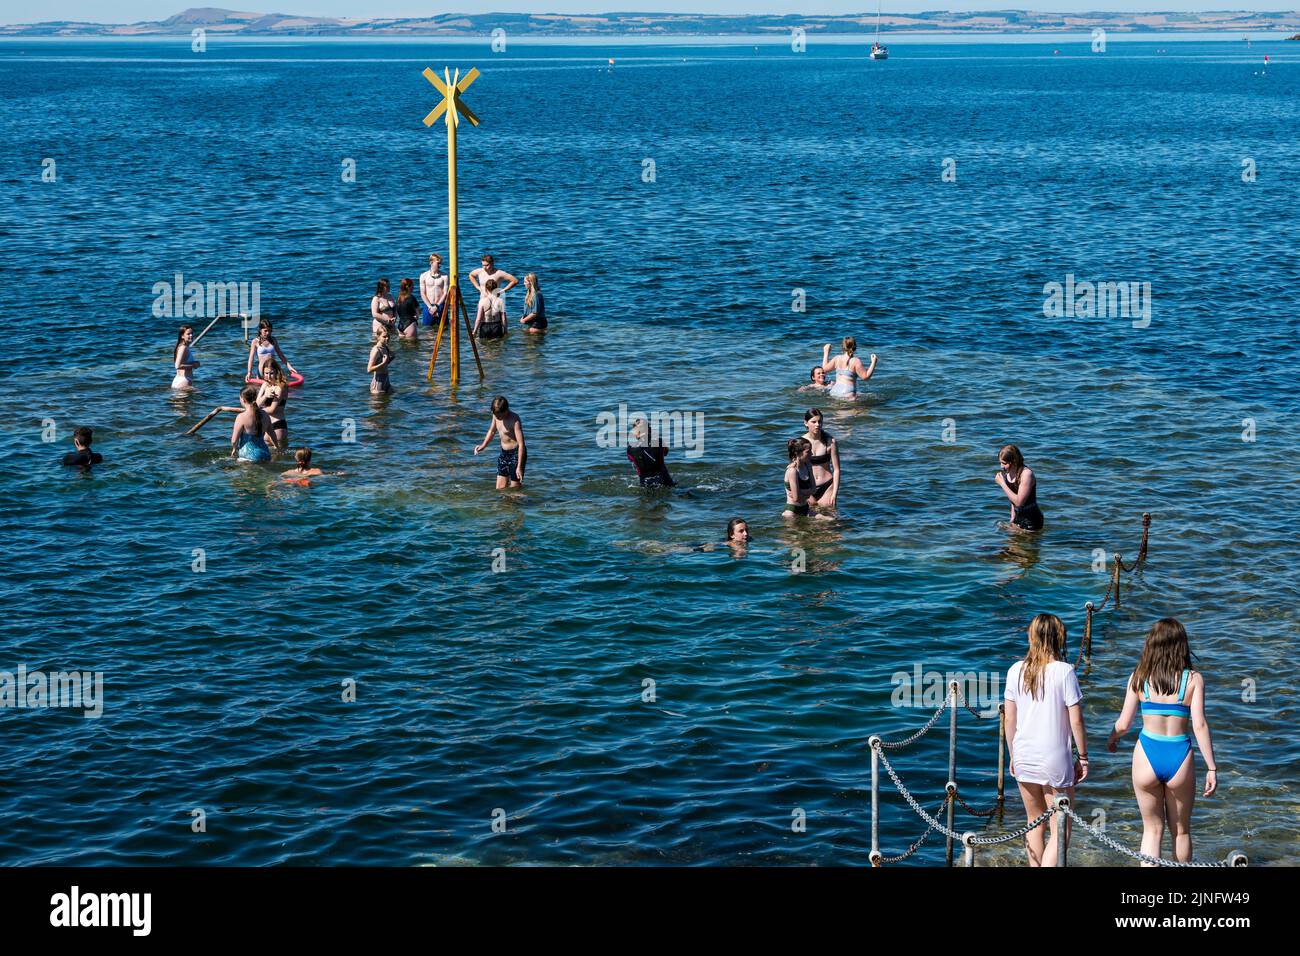 North Berwick, East Lothian, Scotland, UK, 11th August 2022. UK Weather: Keeping cool in the heat. With the temperature reaching up to 27 degrees, the seaside town offers opportunities to cool down. Children in swimsuits cooling off in the sea on the old pier as the tide rises and covers it in the Summer heatwave weather Stock Photo